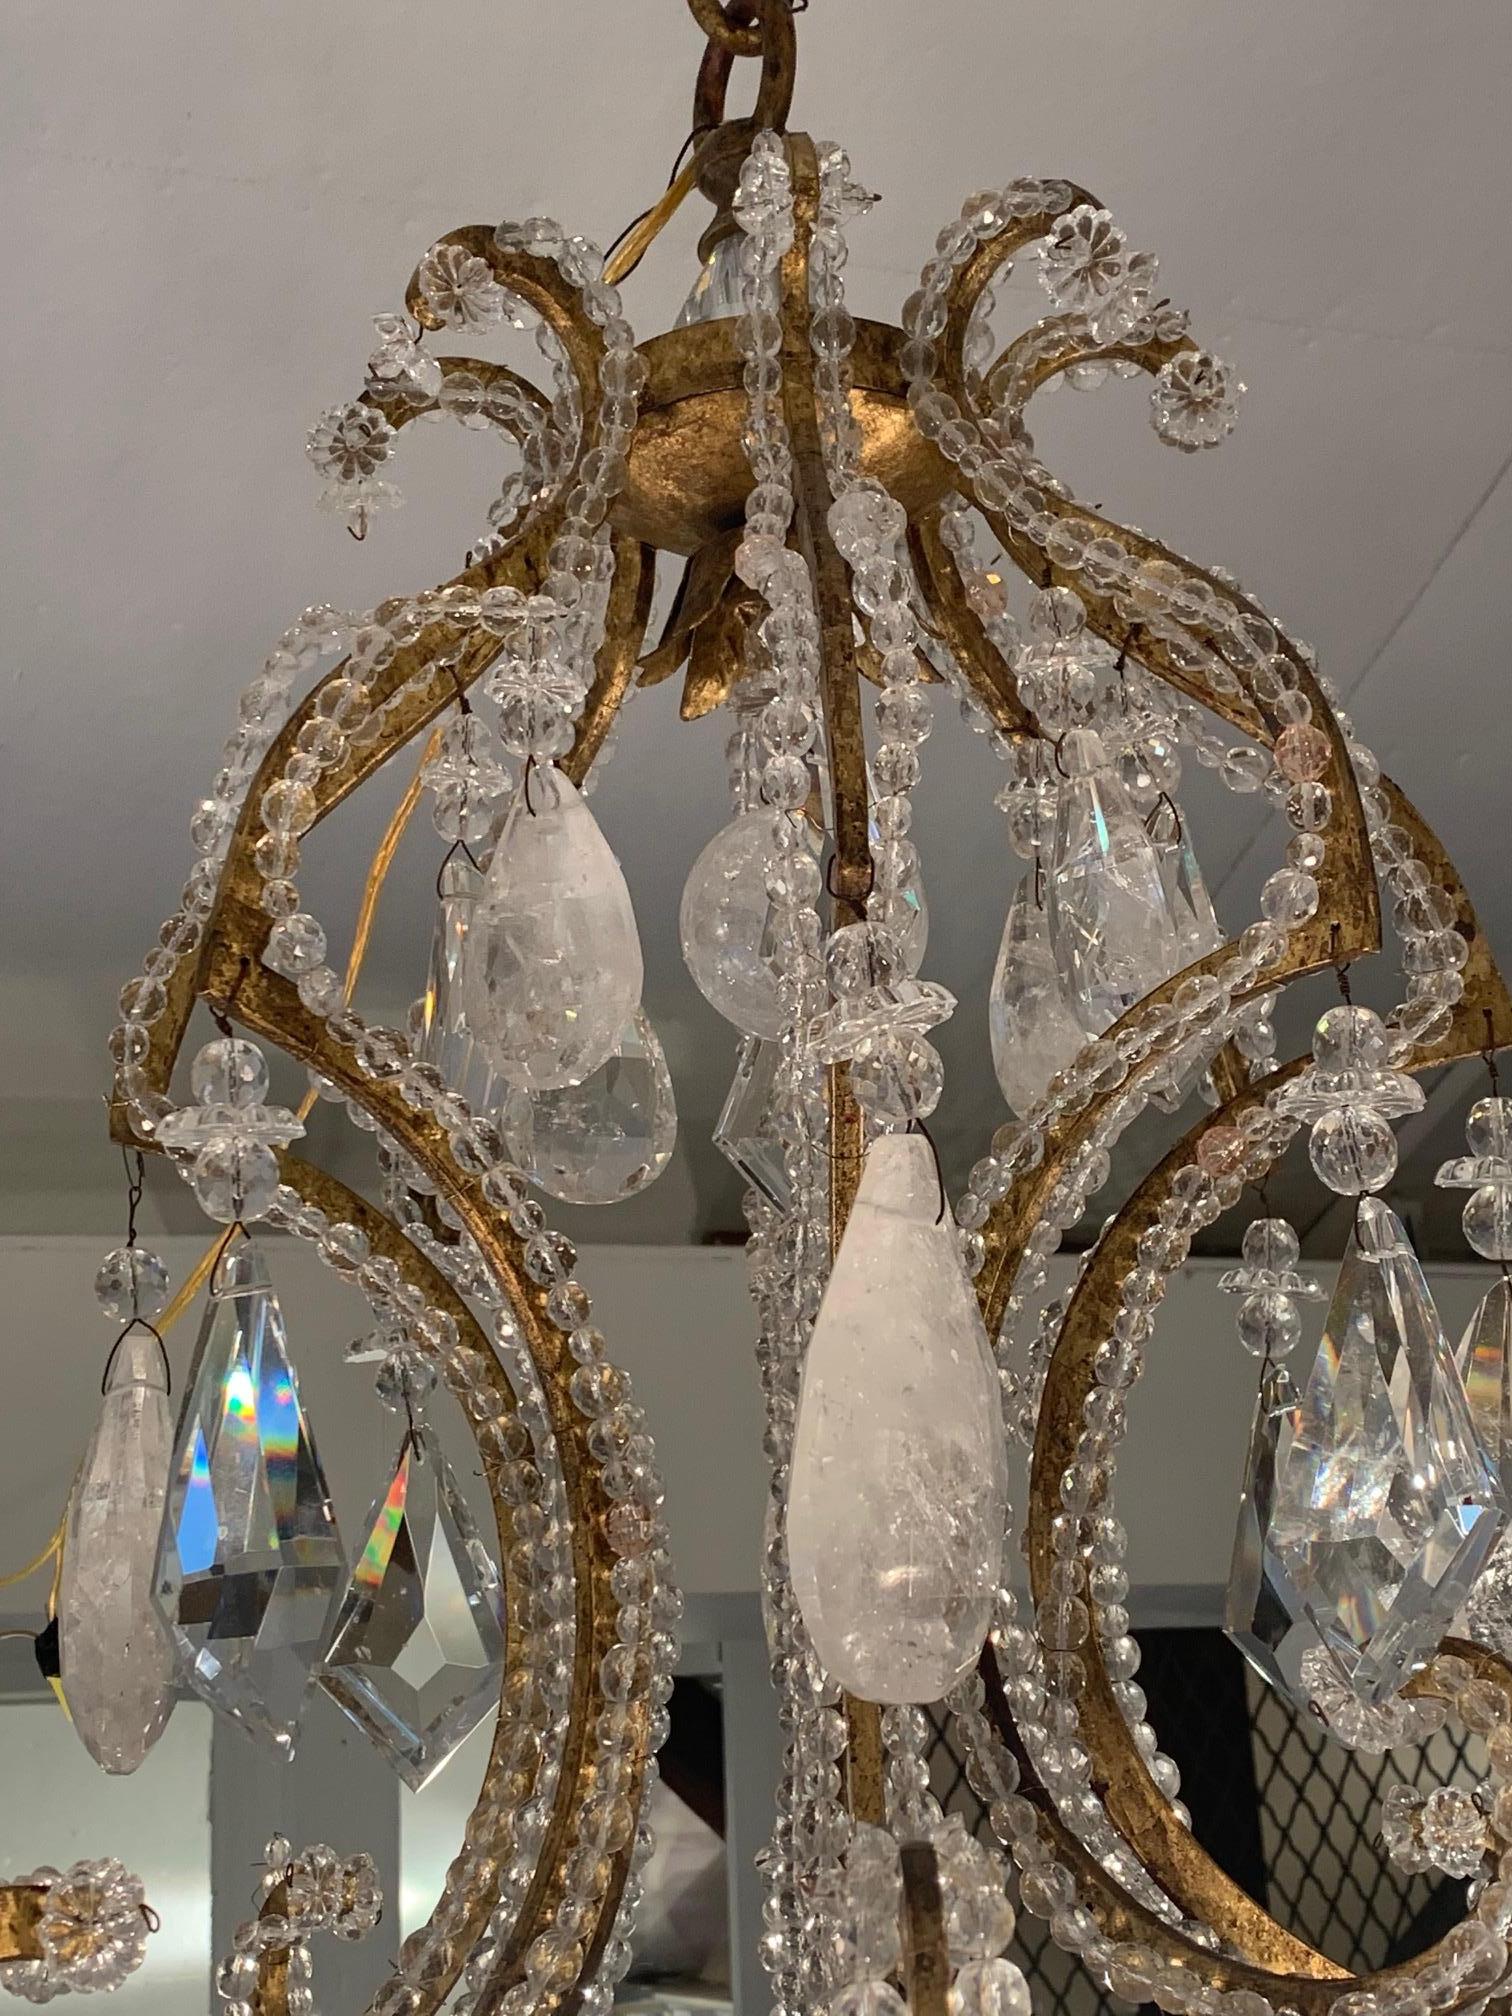 Impressively large and ornate brass and beaded crystal chandelier dripping with huge rock crystals.